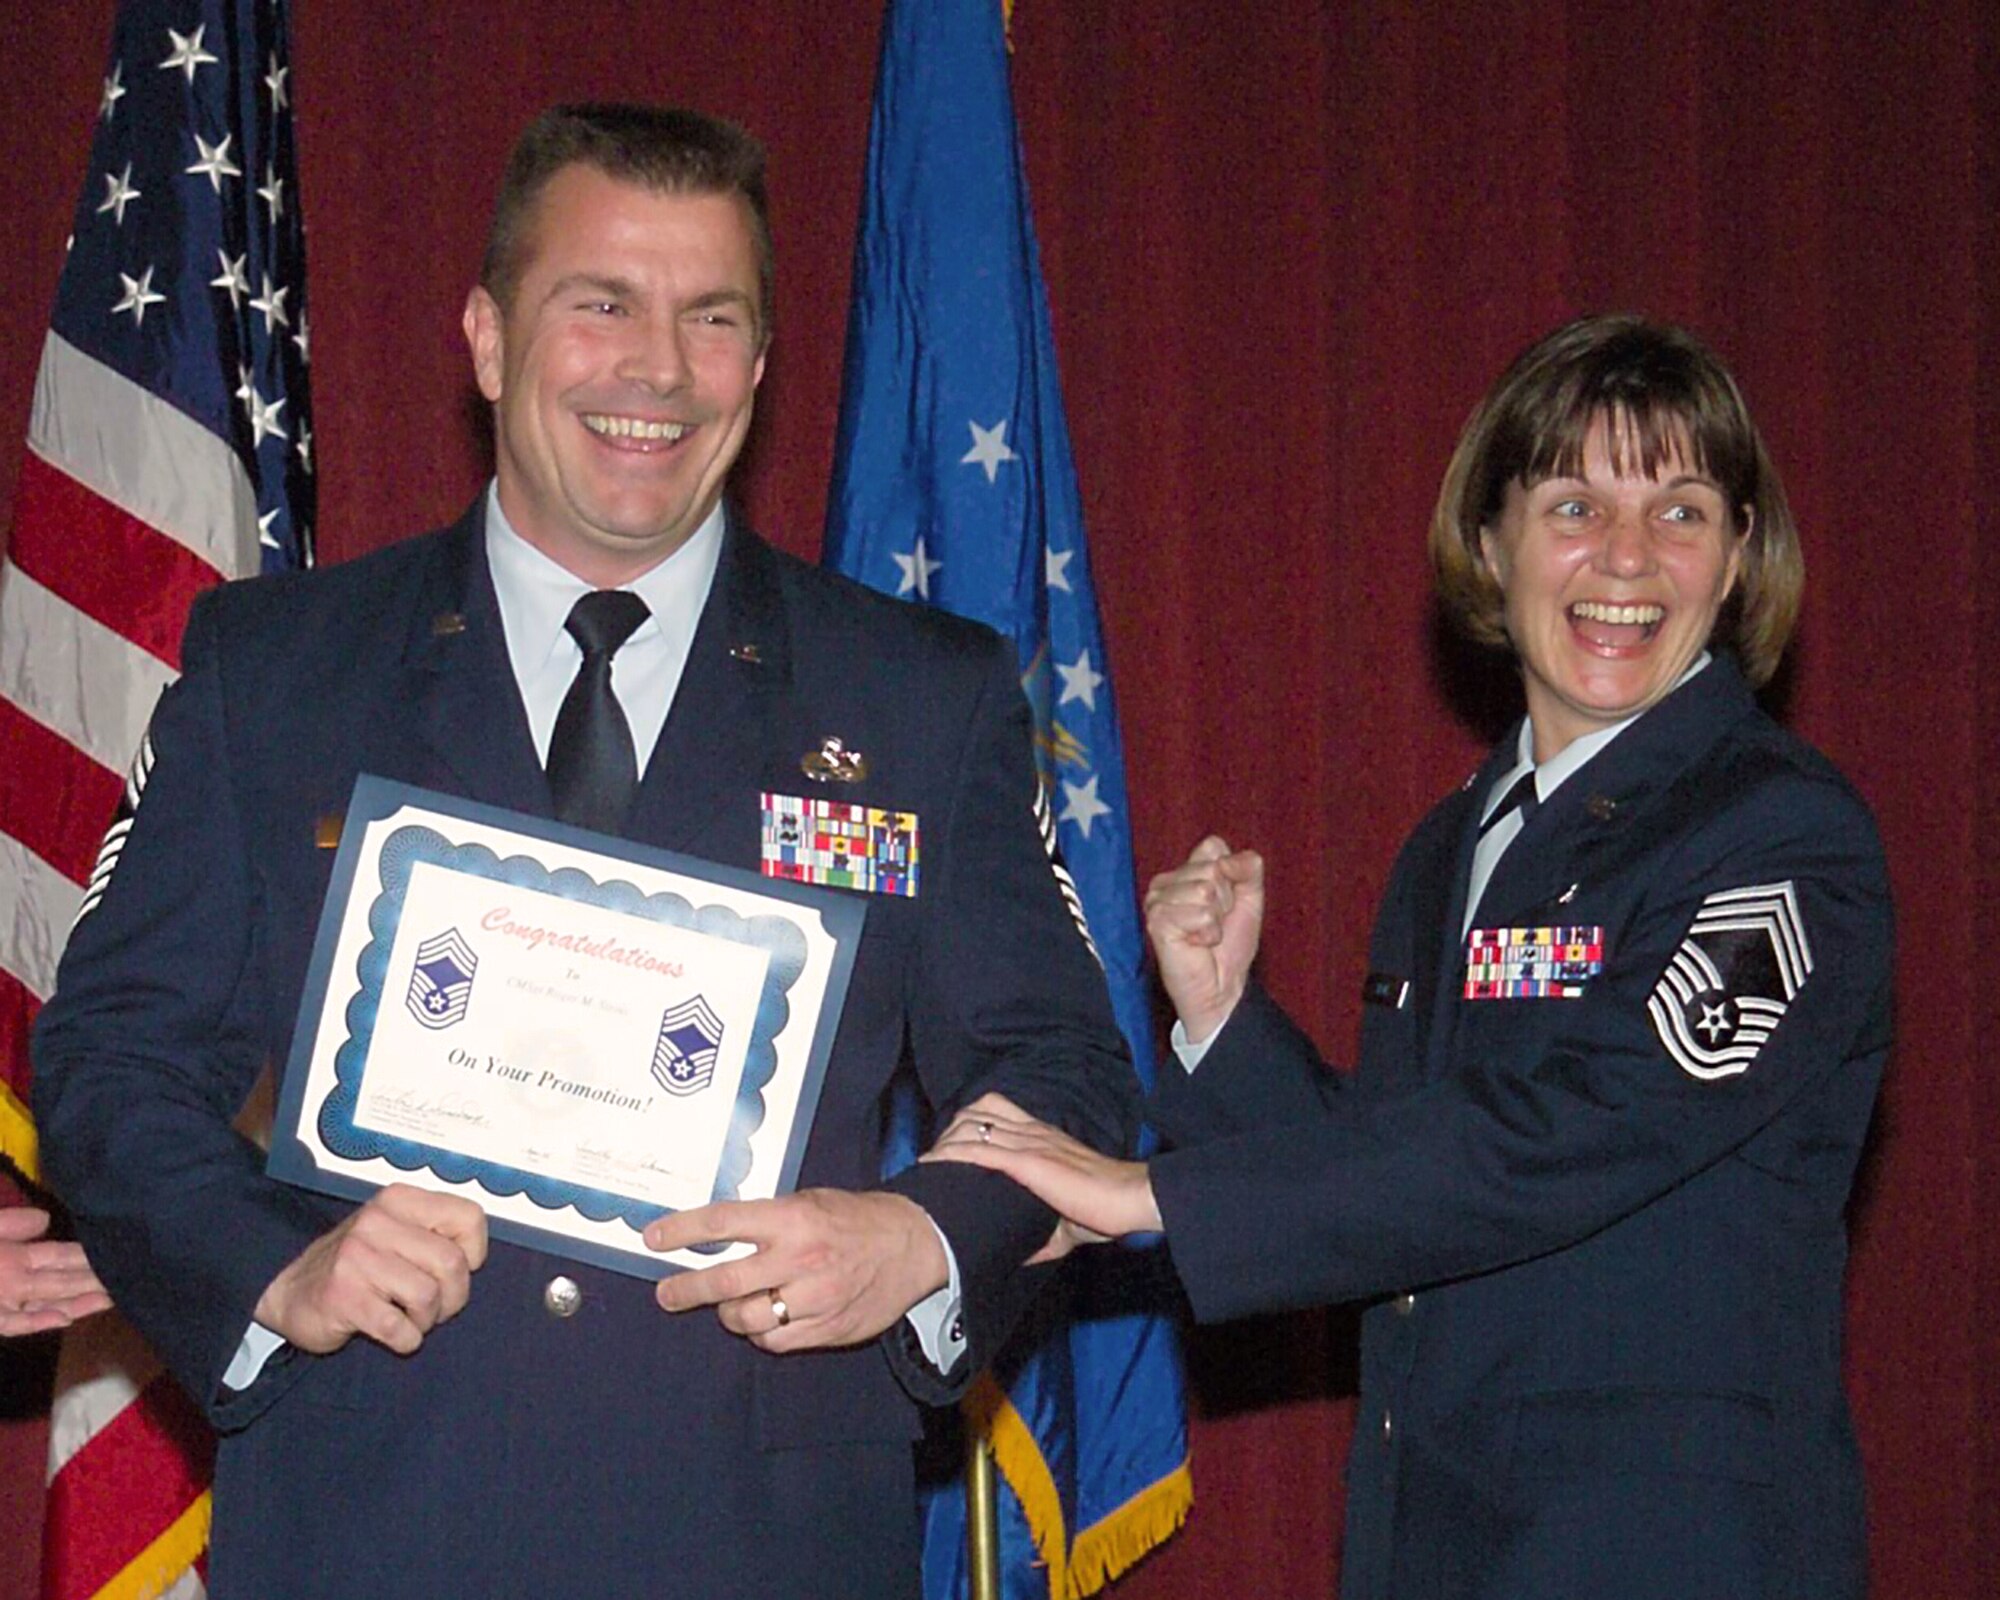 HANSCOM AIR FORCE BASE, Mass. -- Chief Master Sgt. Lisa Sirois tacks chief master sergeant stripes on her husband, Roger Sirois, during his promotion ceremony here.  The two married after high school in 1980 and then joined the Air Force together.  (U.S. Air Force photo by Linda LaBonte Britt)